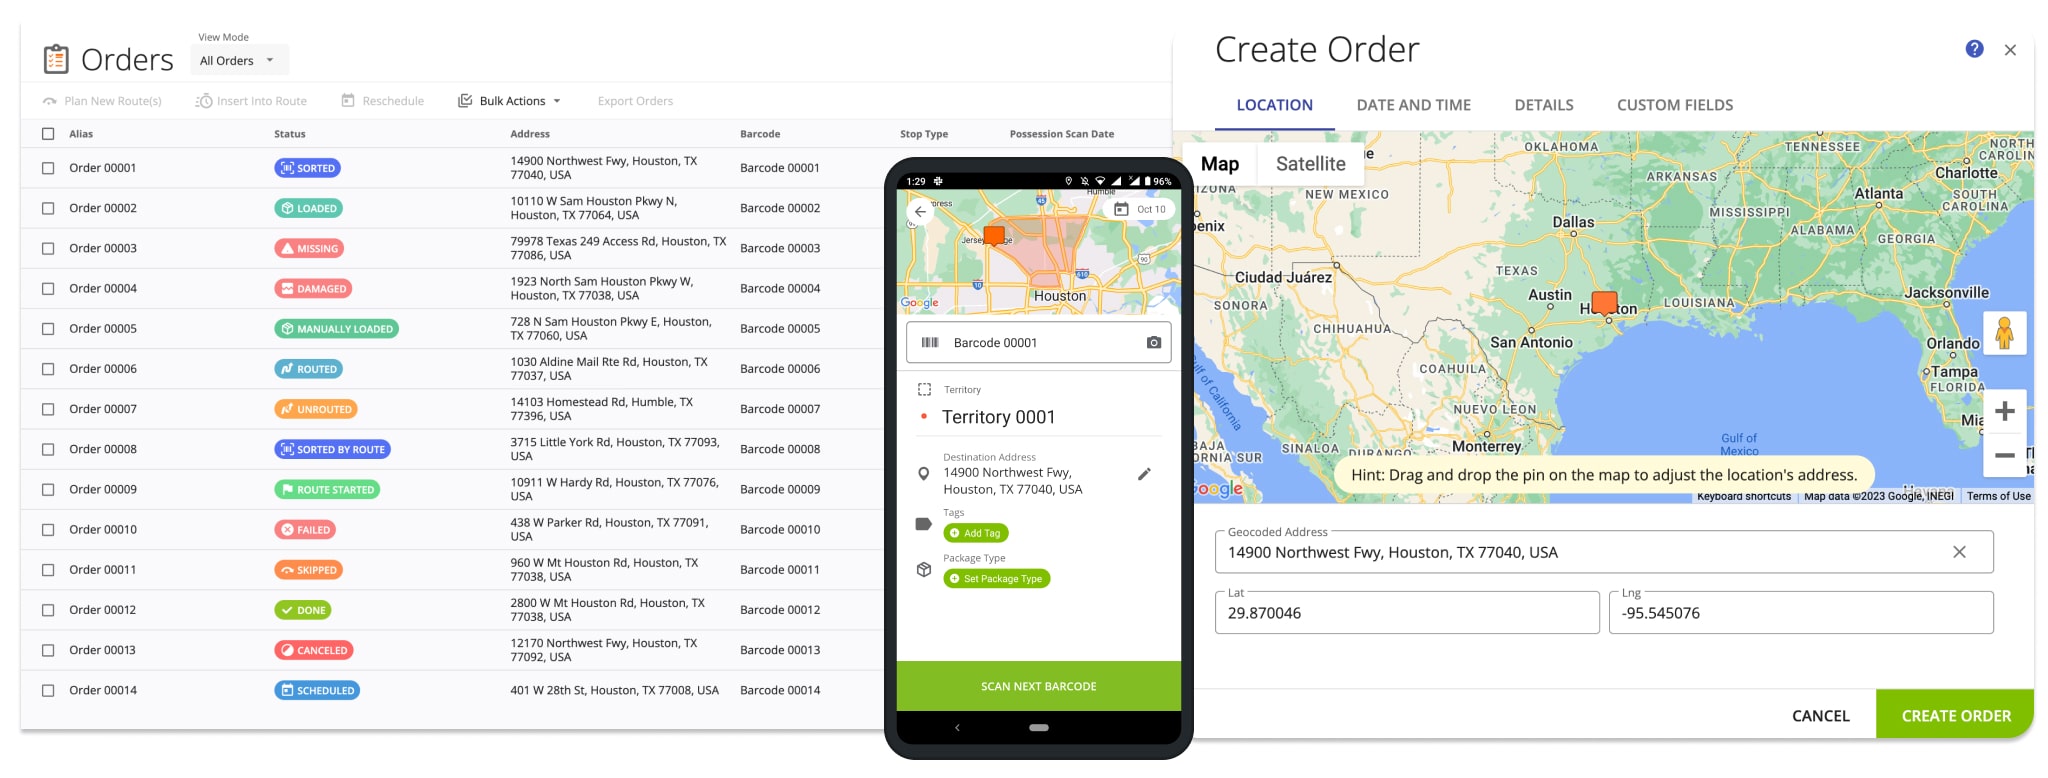 Route4Me's Route Planner Orders List enables users to import orders, manage orders, use orders for planning routes, and more.